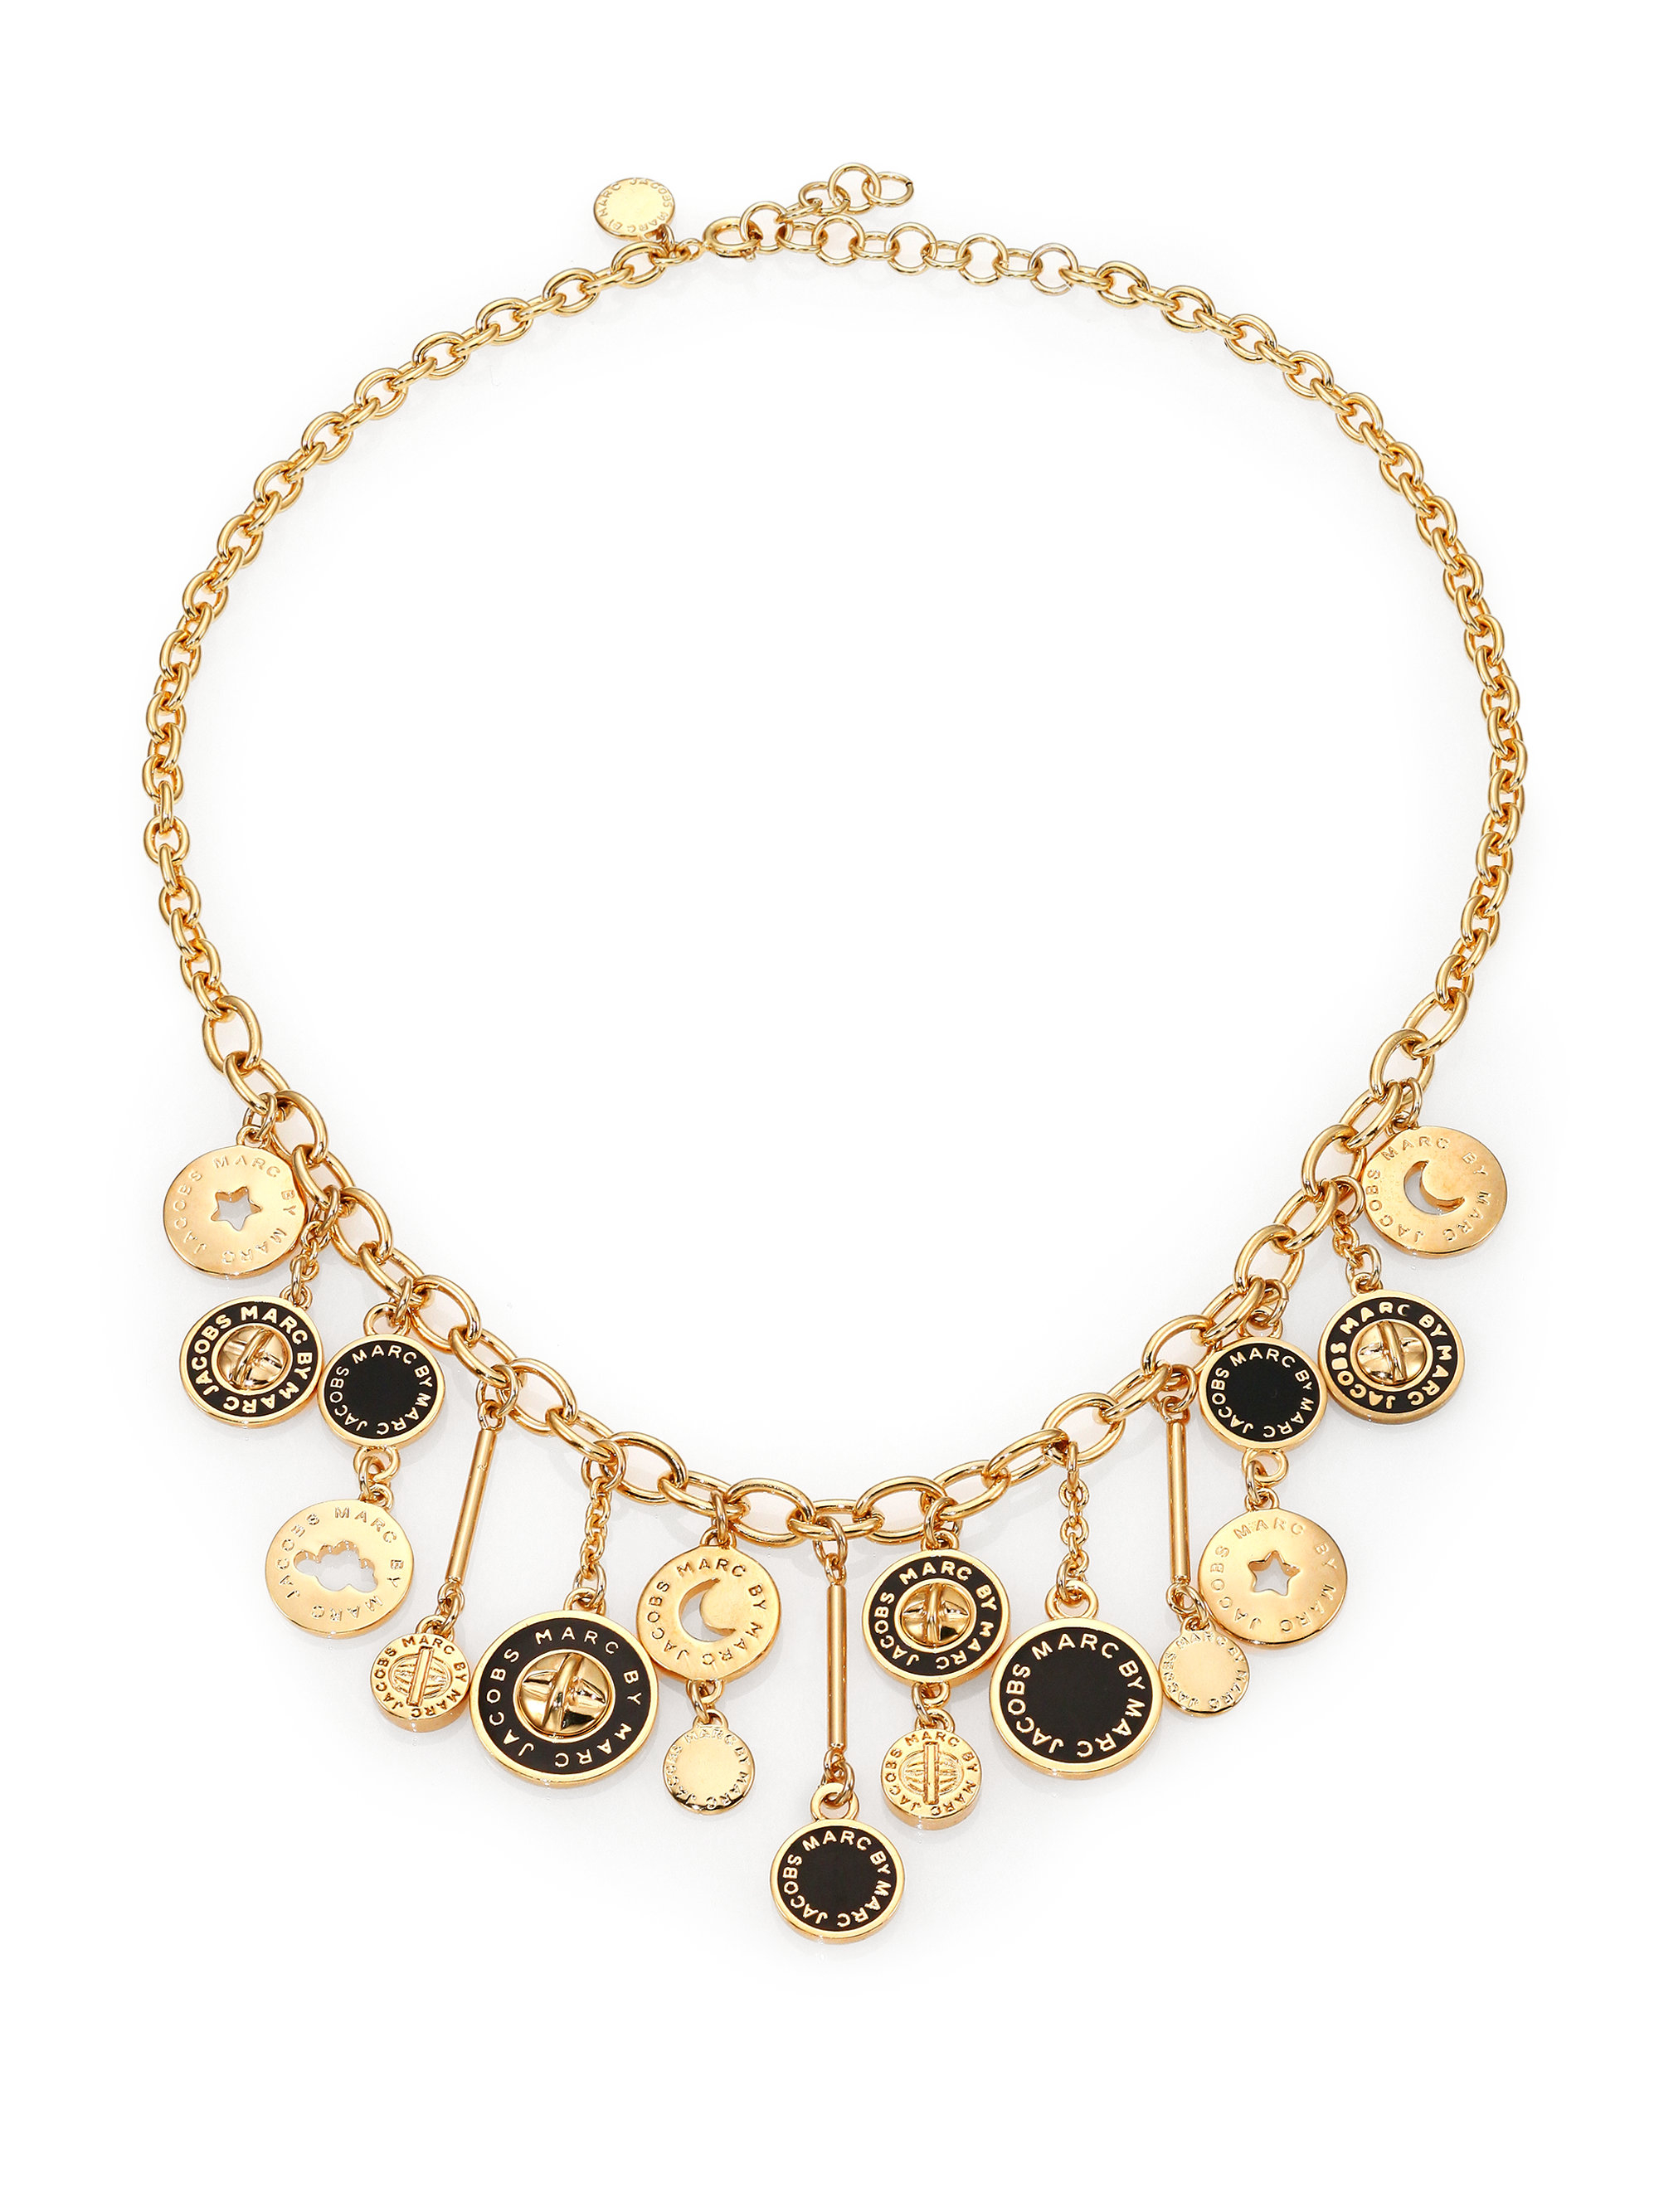 Lyst - Marc By Marc Jacobs Stardust Charm Necklace in Black